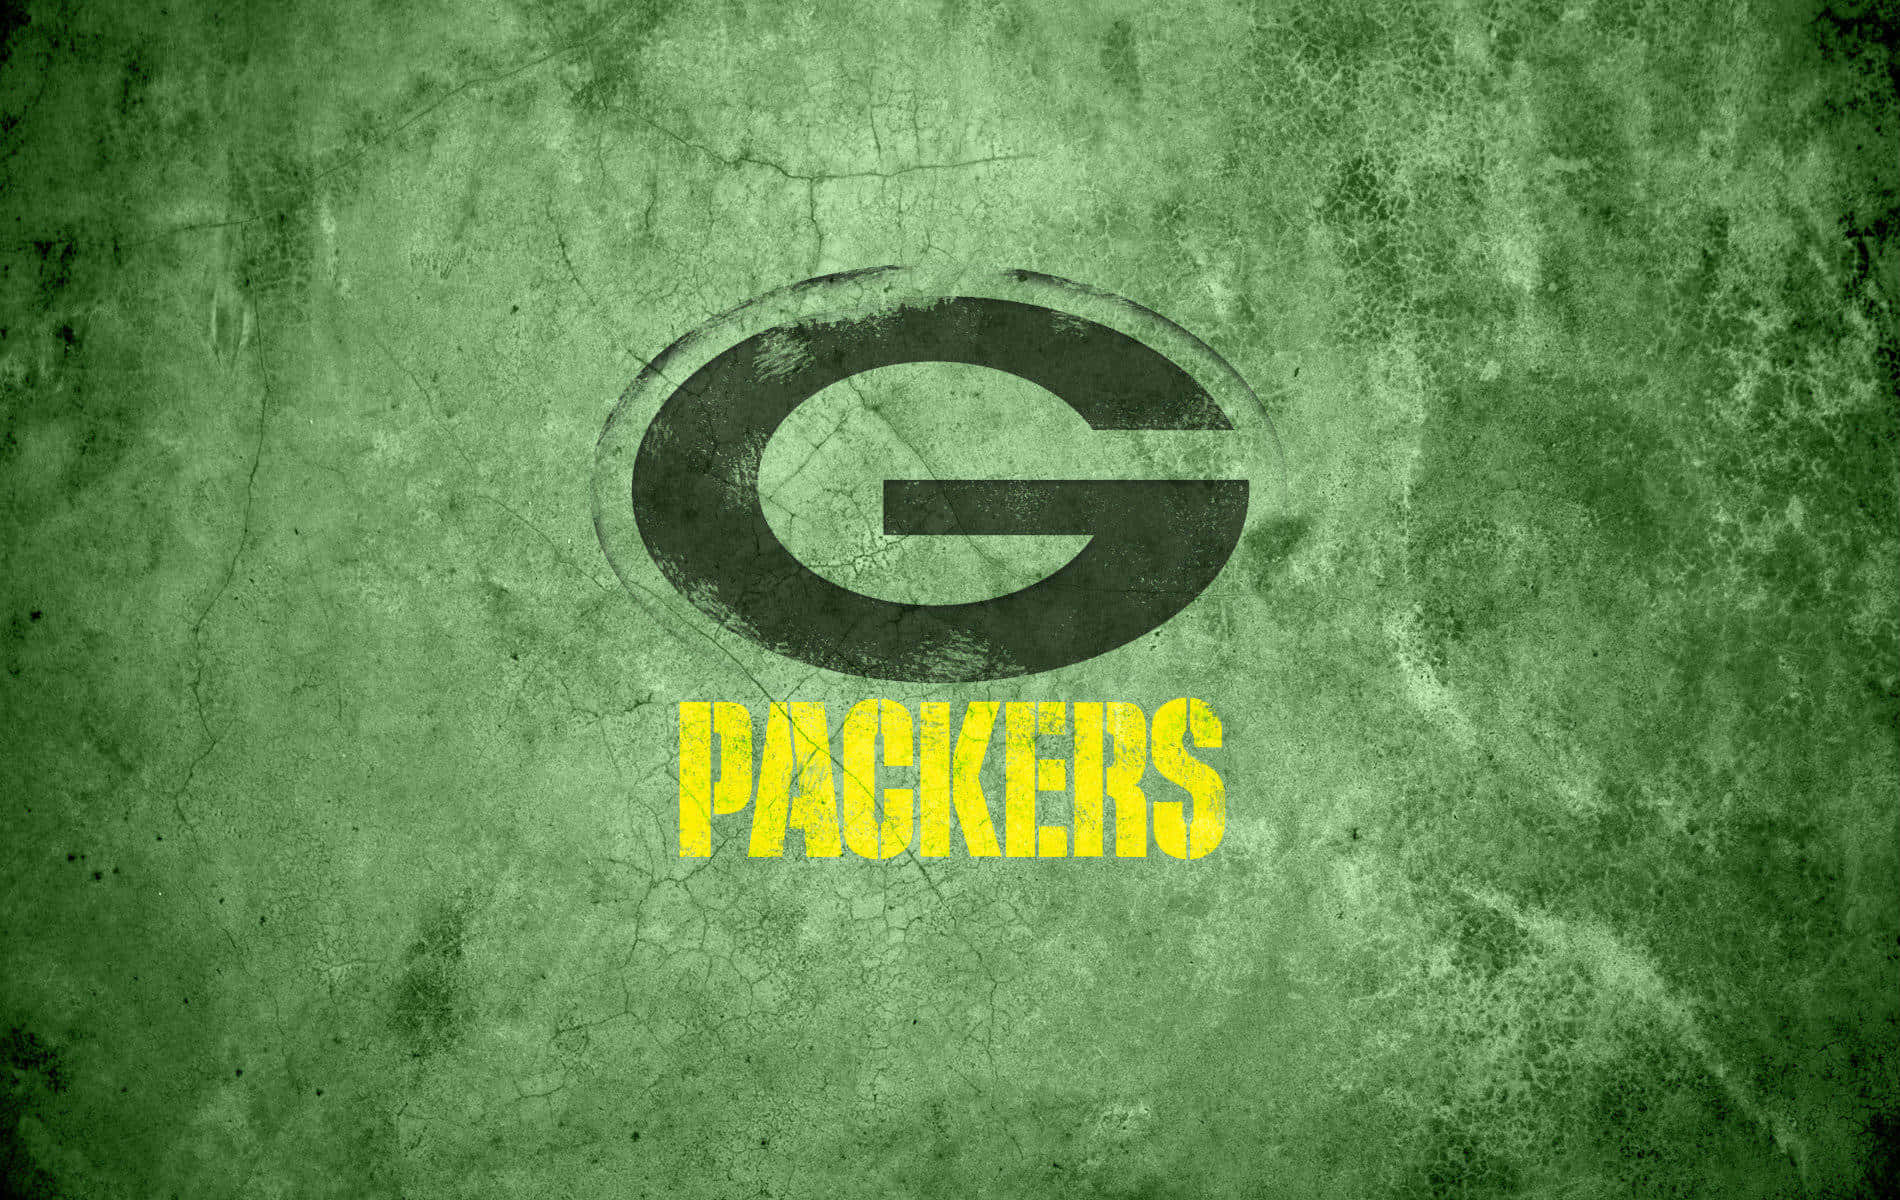 Green Bay Packers Logo on a Football Field